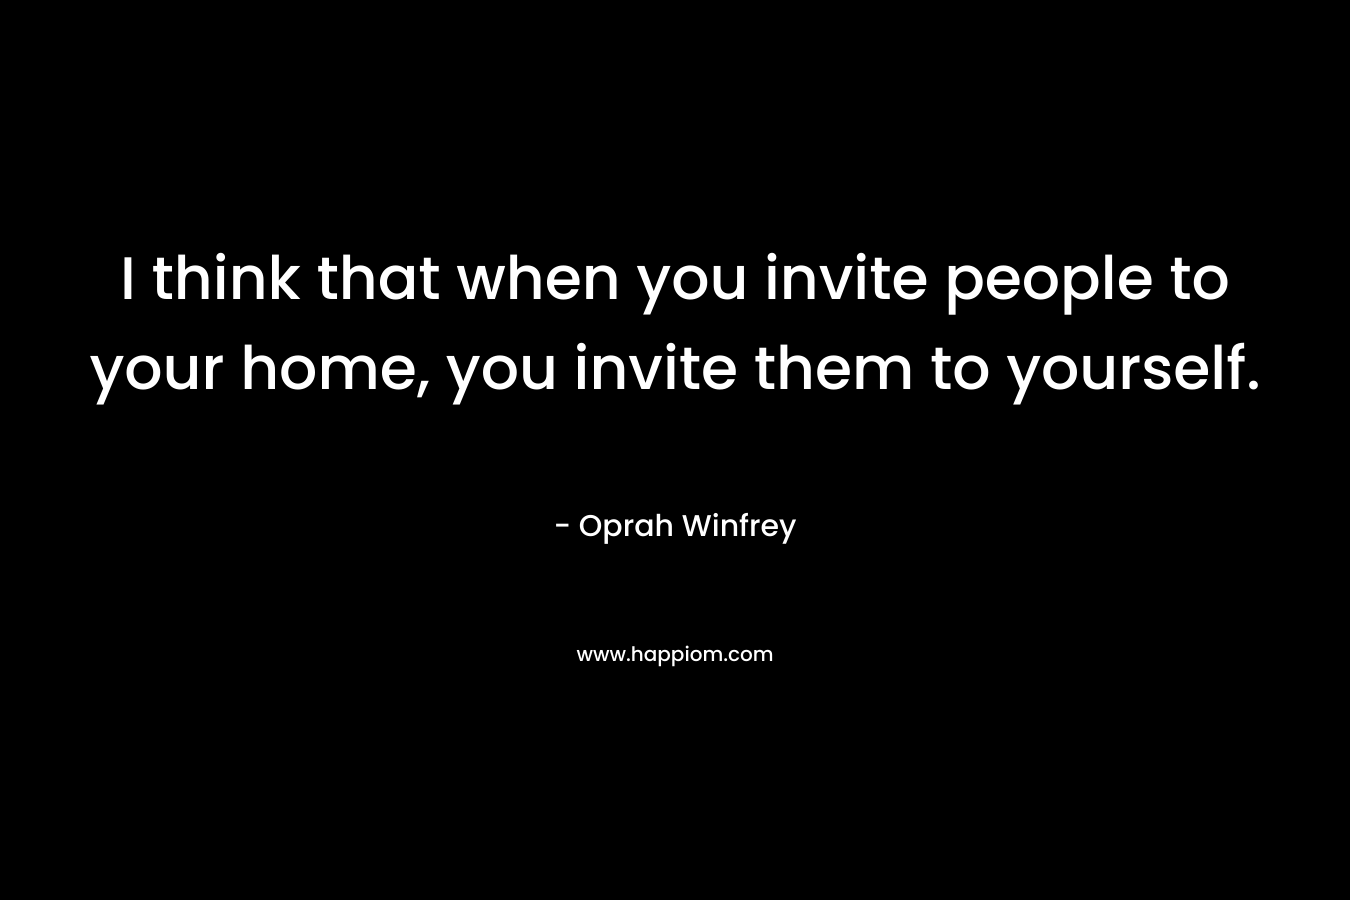 I think that when you invite people to your home, you invite them to yourself.